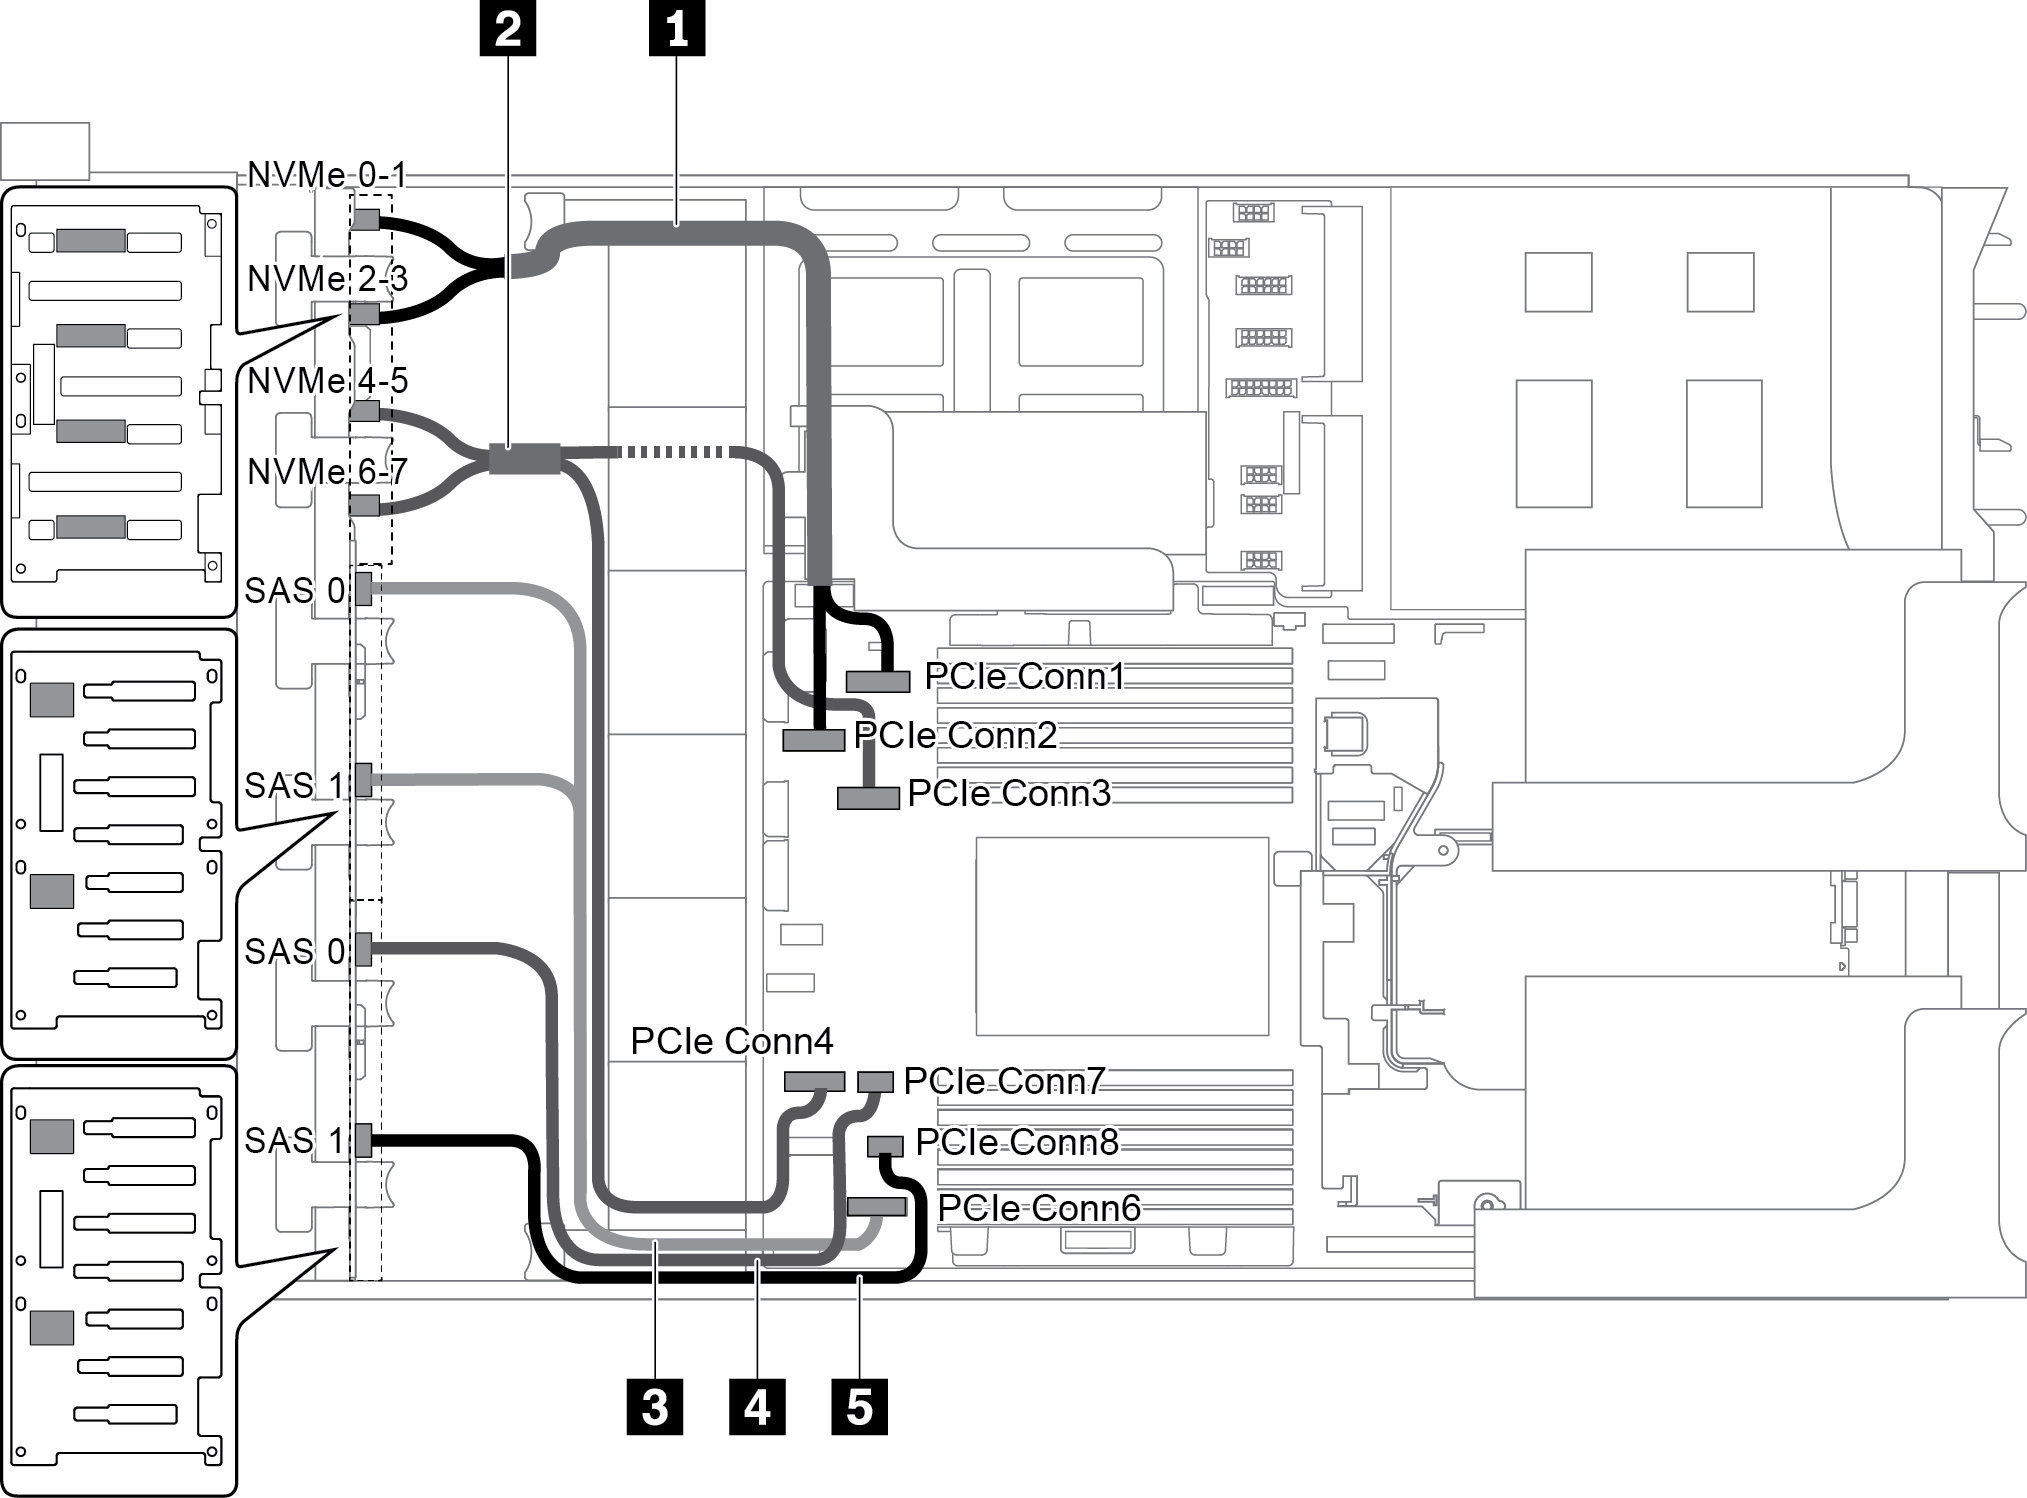 Cable routing for configuration with three front backplanes (8 NVMe + 2 x 8 SAS/SATA)